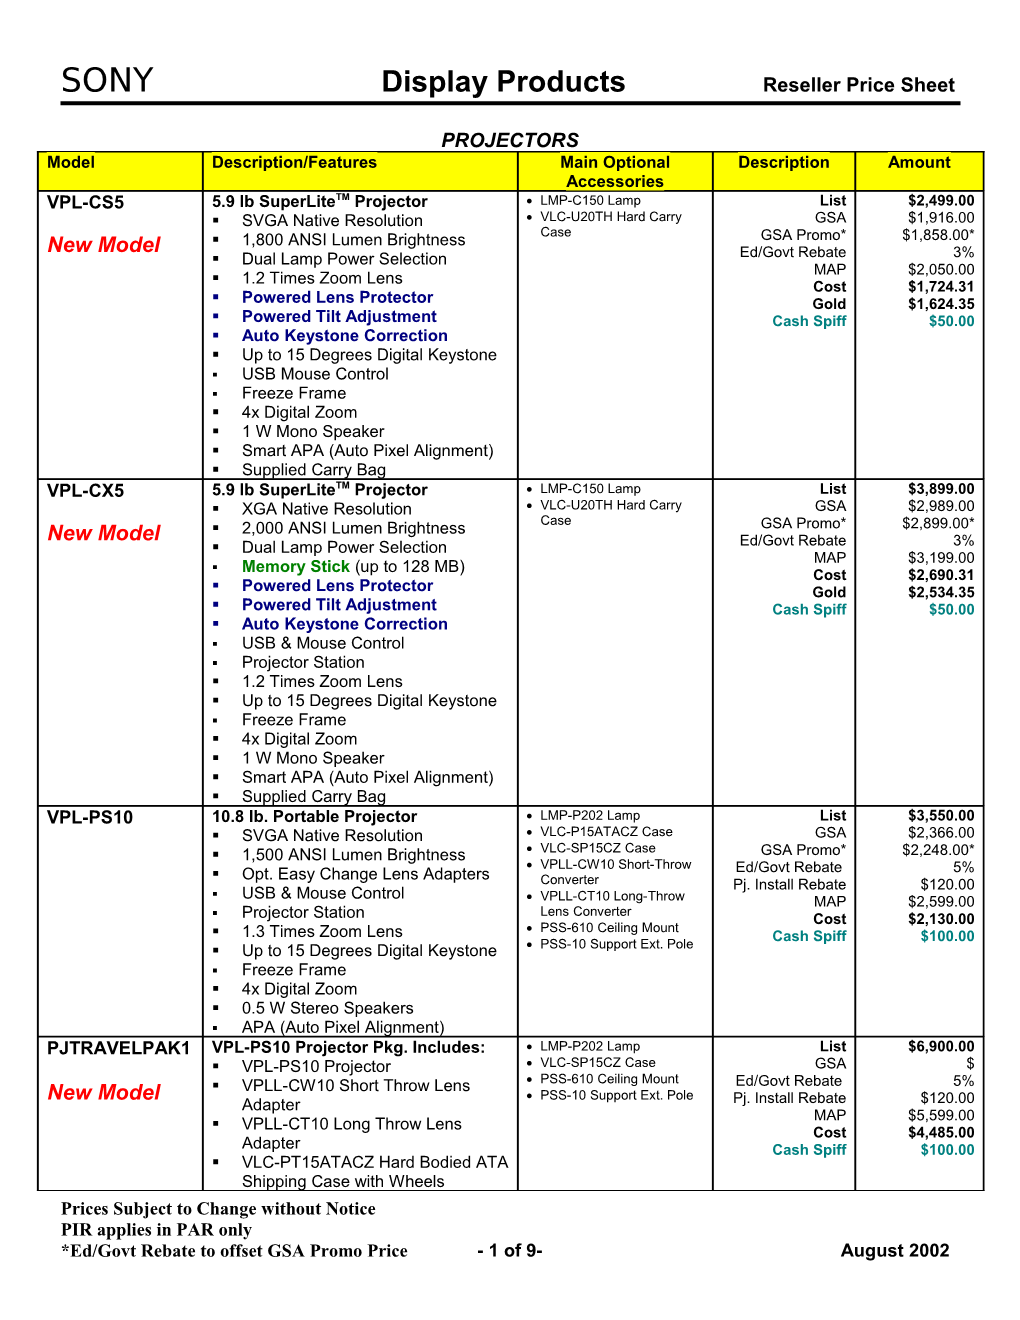 SONY Display Products Reseller Price Sheet